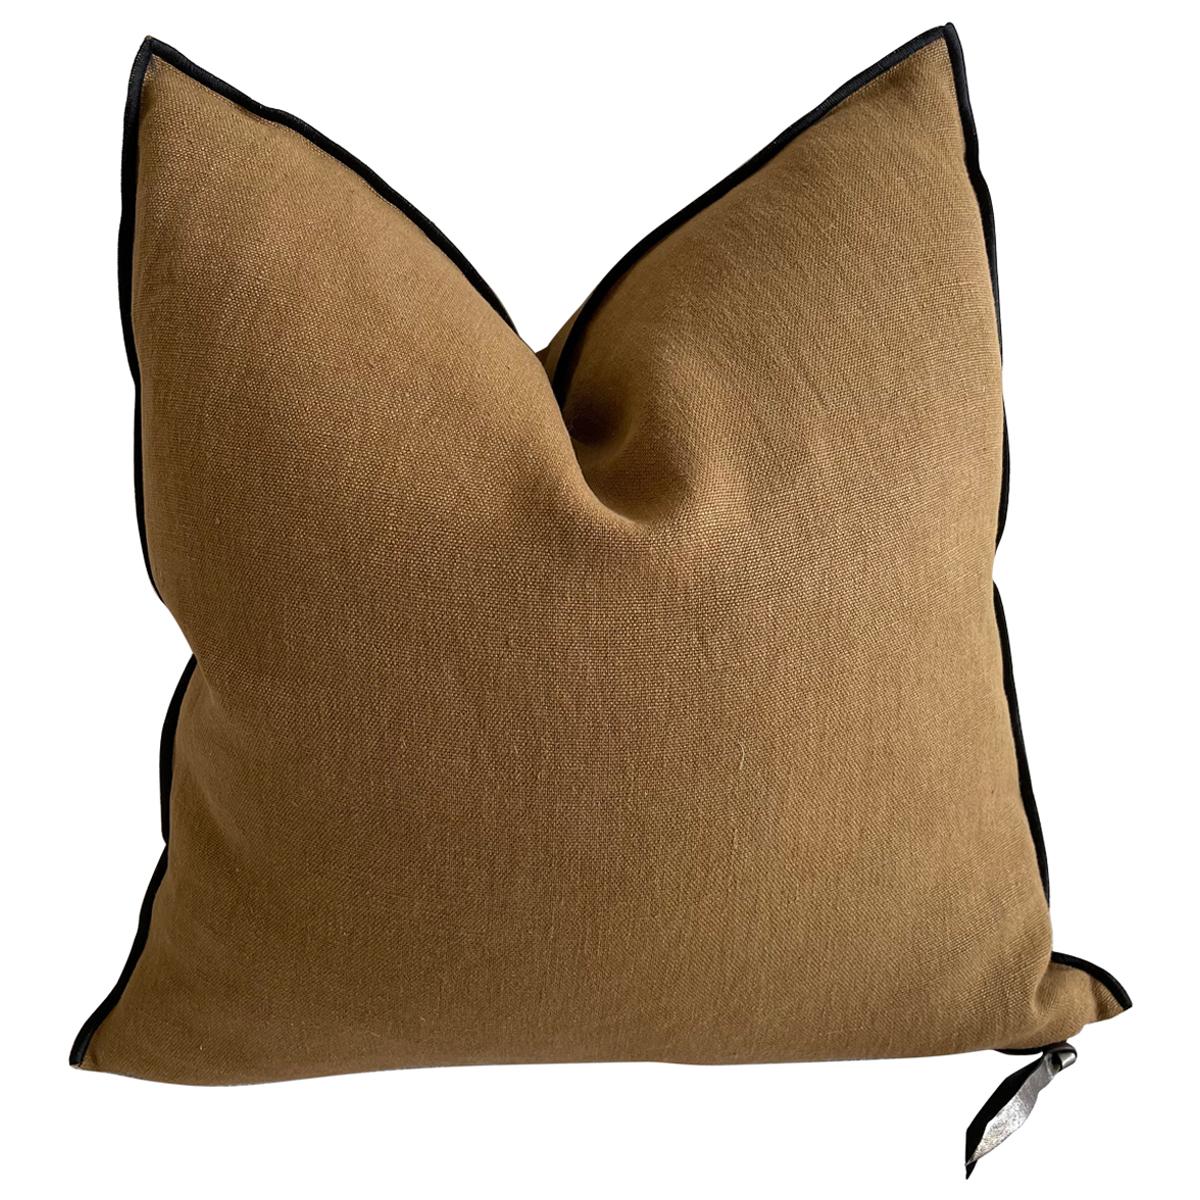 Stone Wash French Linen Accent Pillow